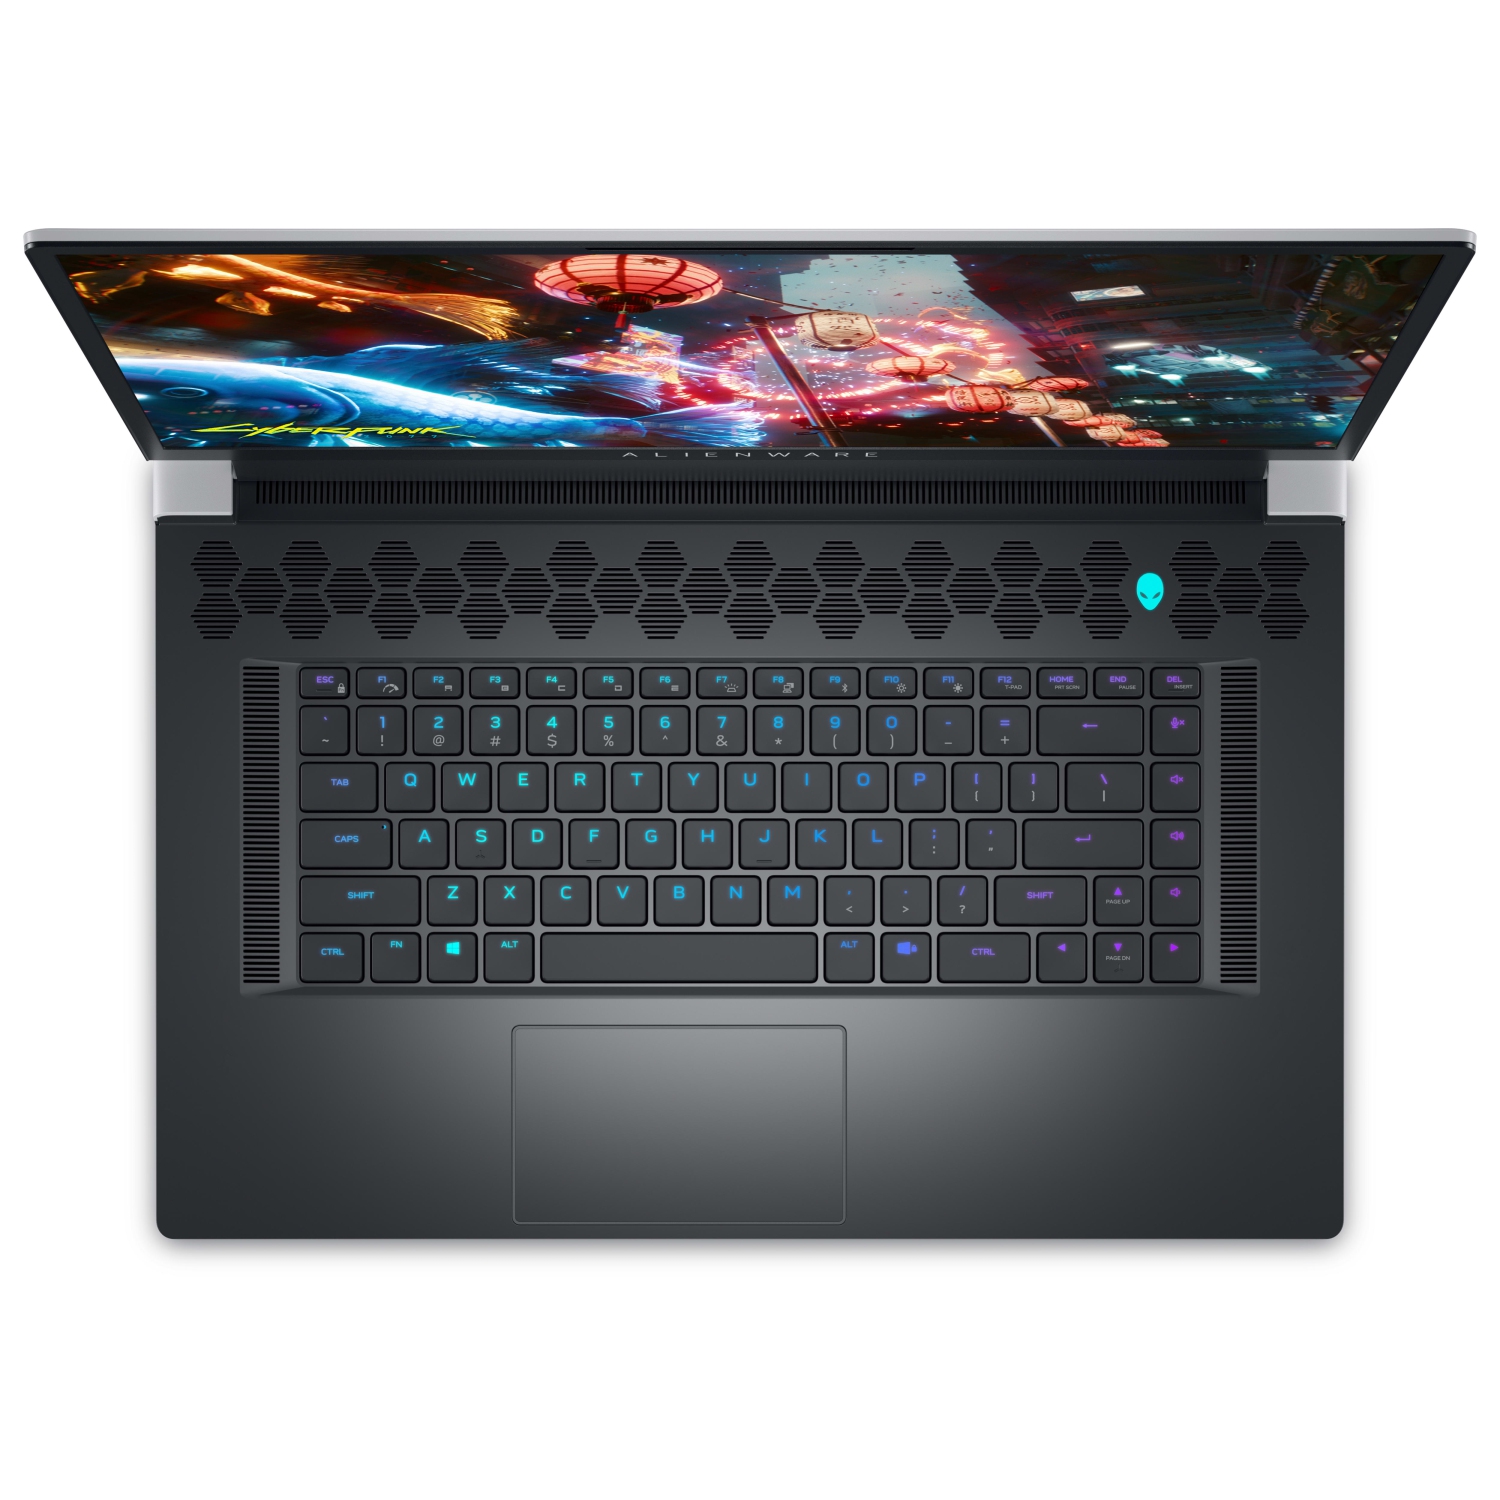 Refurbished (Excellent) – Dell Alienware X17 R2 Gaming Laptop (2022) | 17.3" FHD | Core i9 - 1TB SSD - 64GB RAM - 3080 Ti | 14 Cores @ 5 GHz - 12th Gen CPU - 12GB GDDR6X